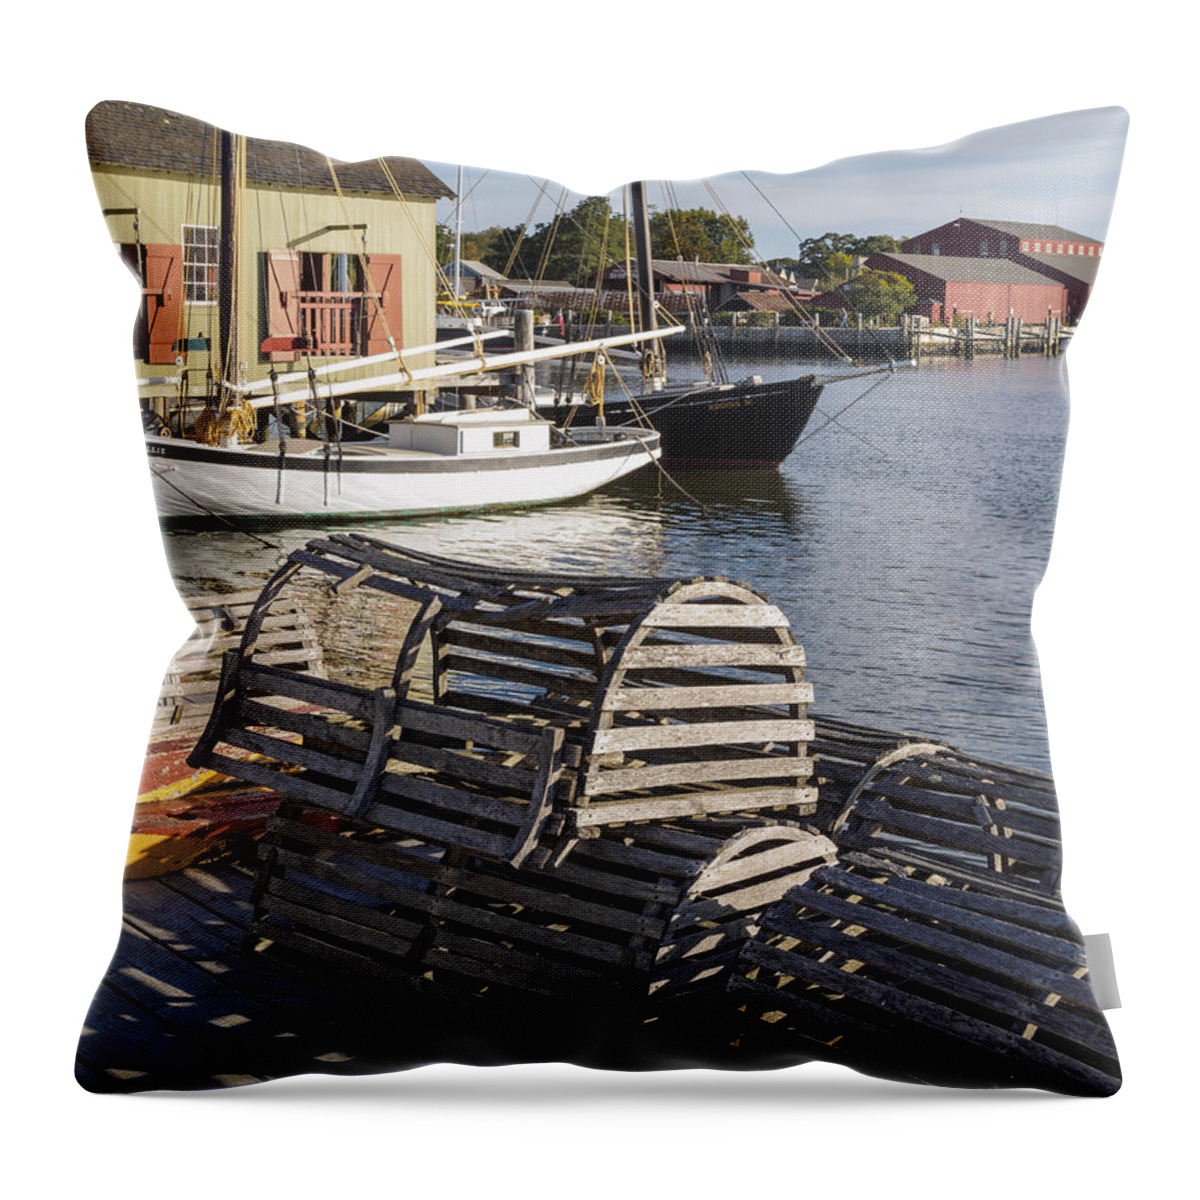 Lobster Boxes Throw Pillow featuring the photograph Lobster Boxes Mystic Seaport by Marianne Campolongo